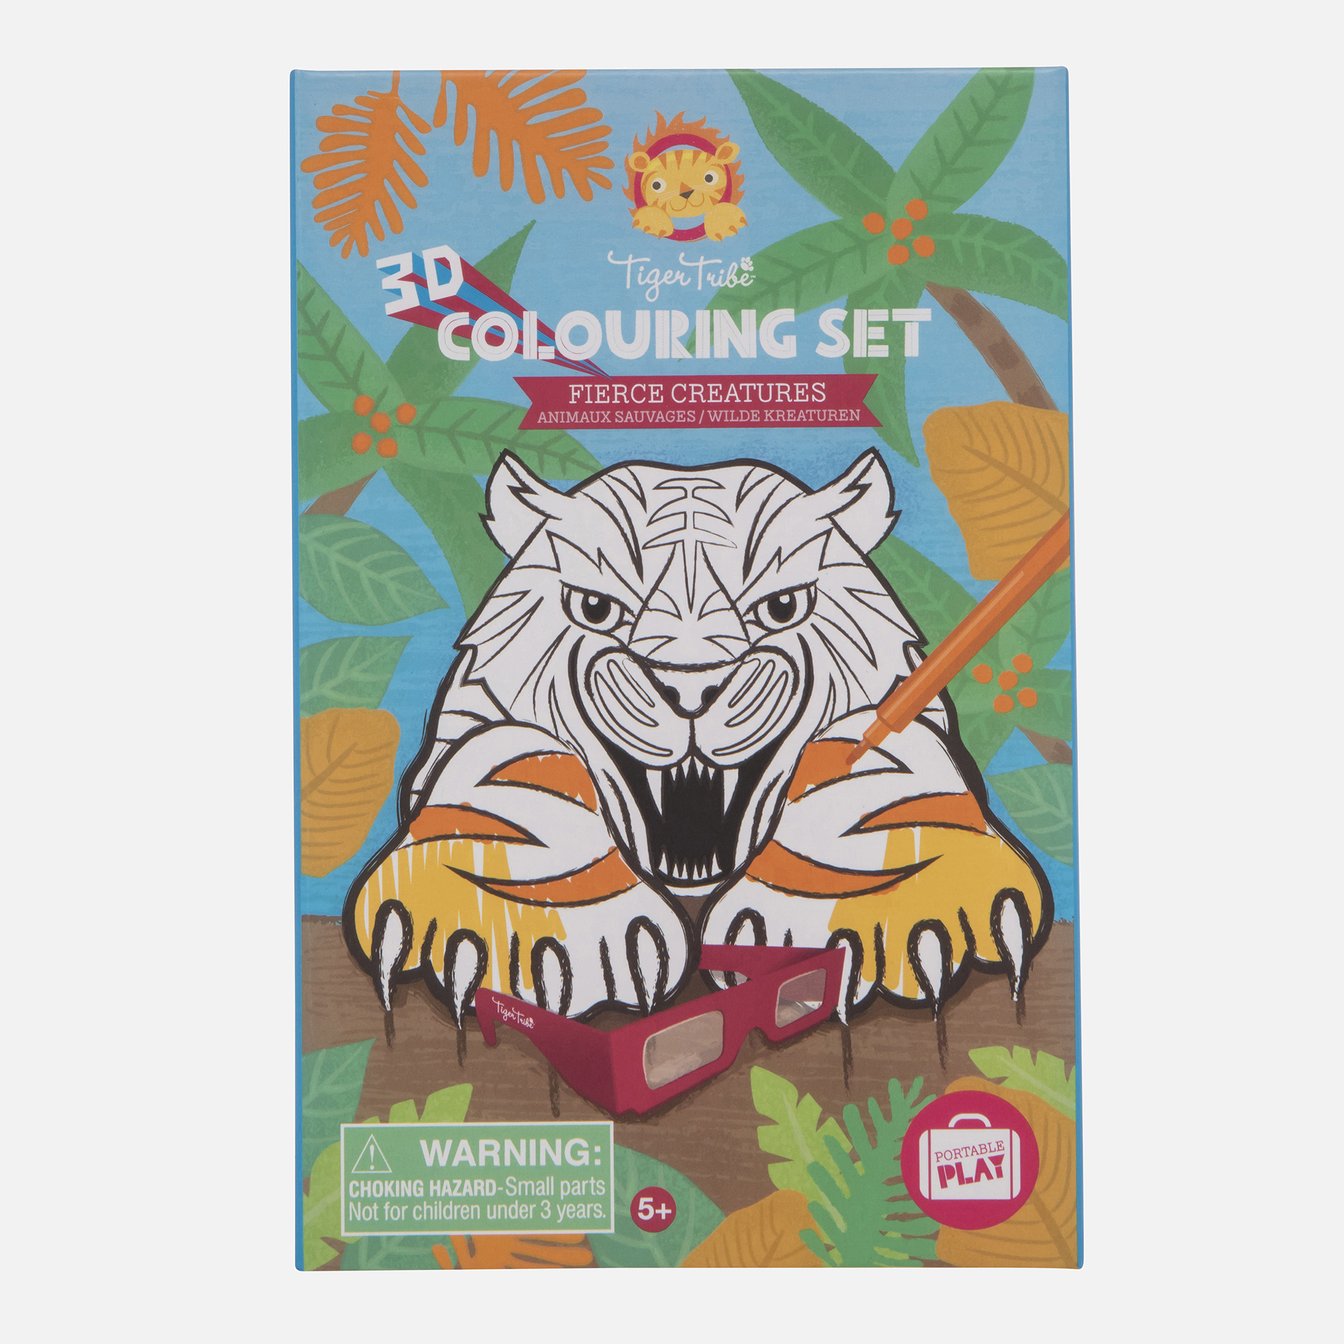 Tiger Tribe | 3D Colouring Set - Fierce Creatures